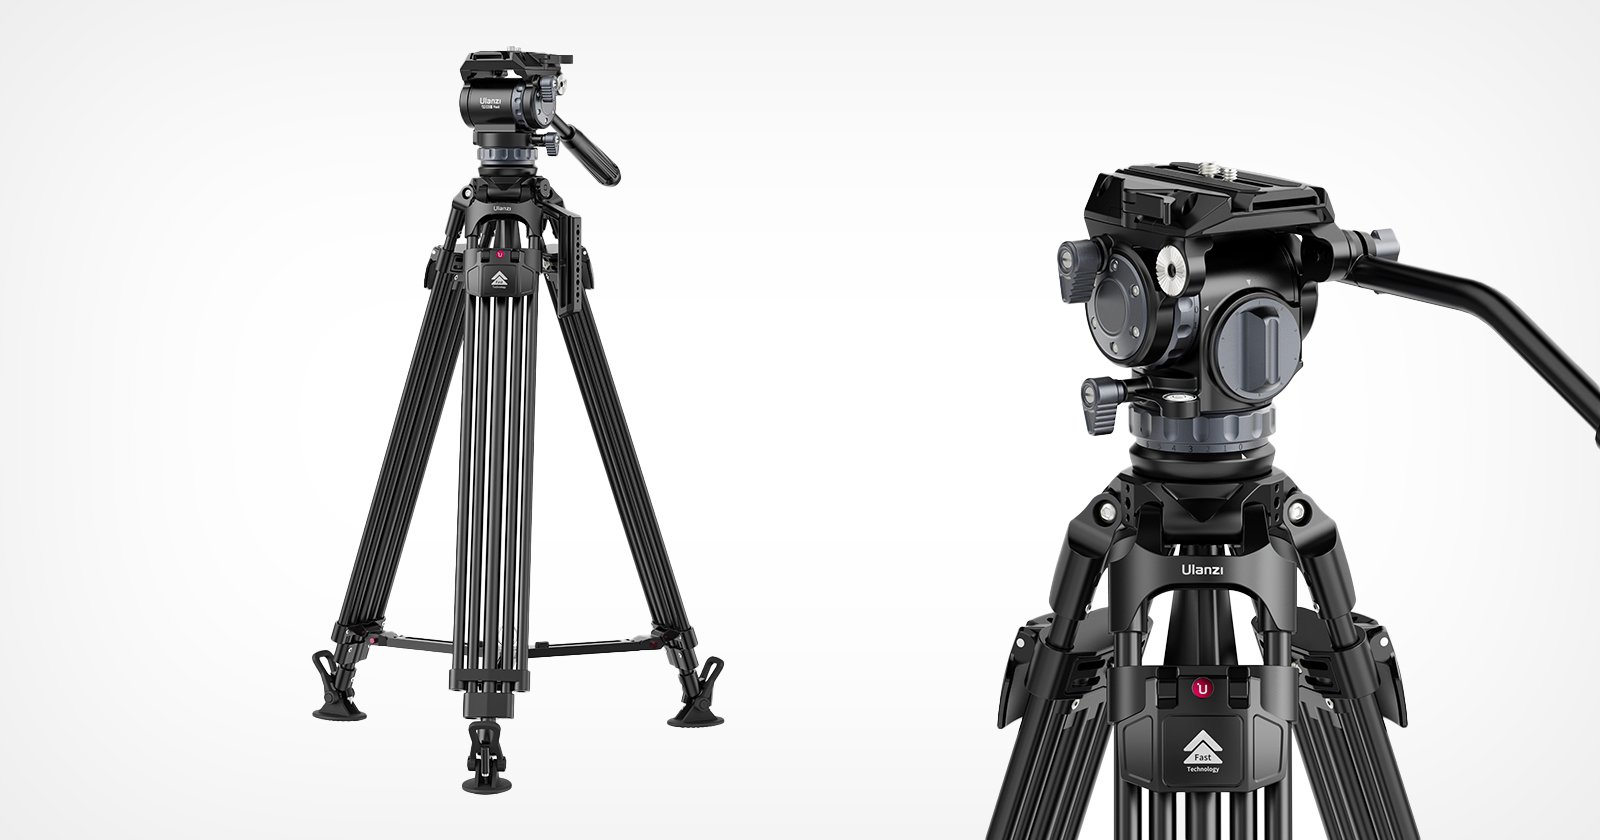 The New Ulanzi Video Tripod Allows for Ultra Smooth Movements